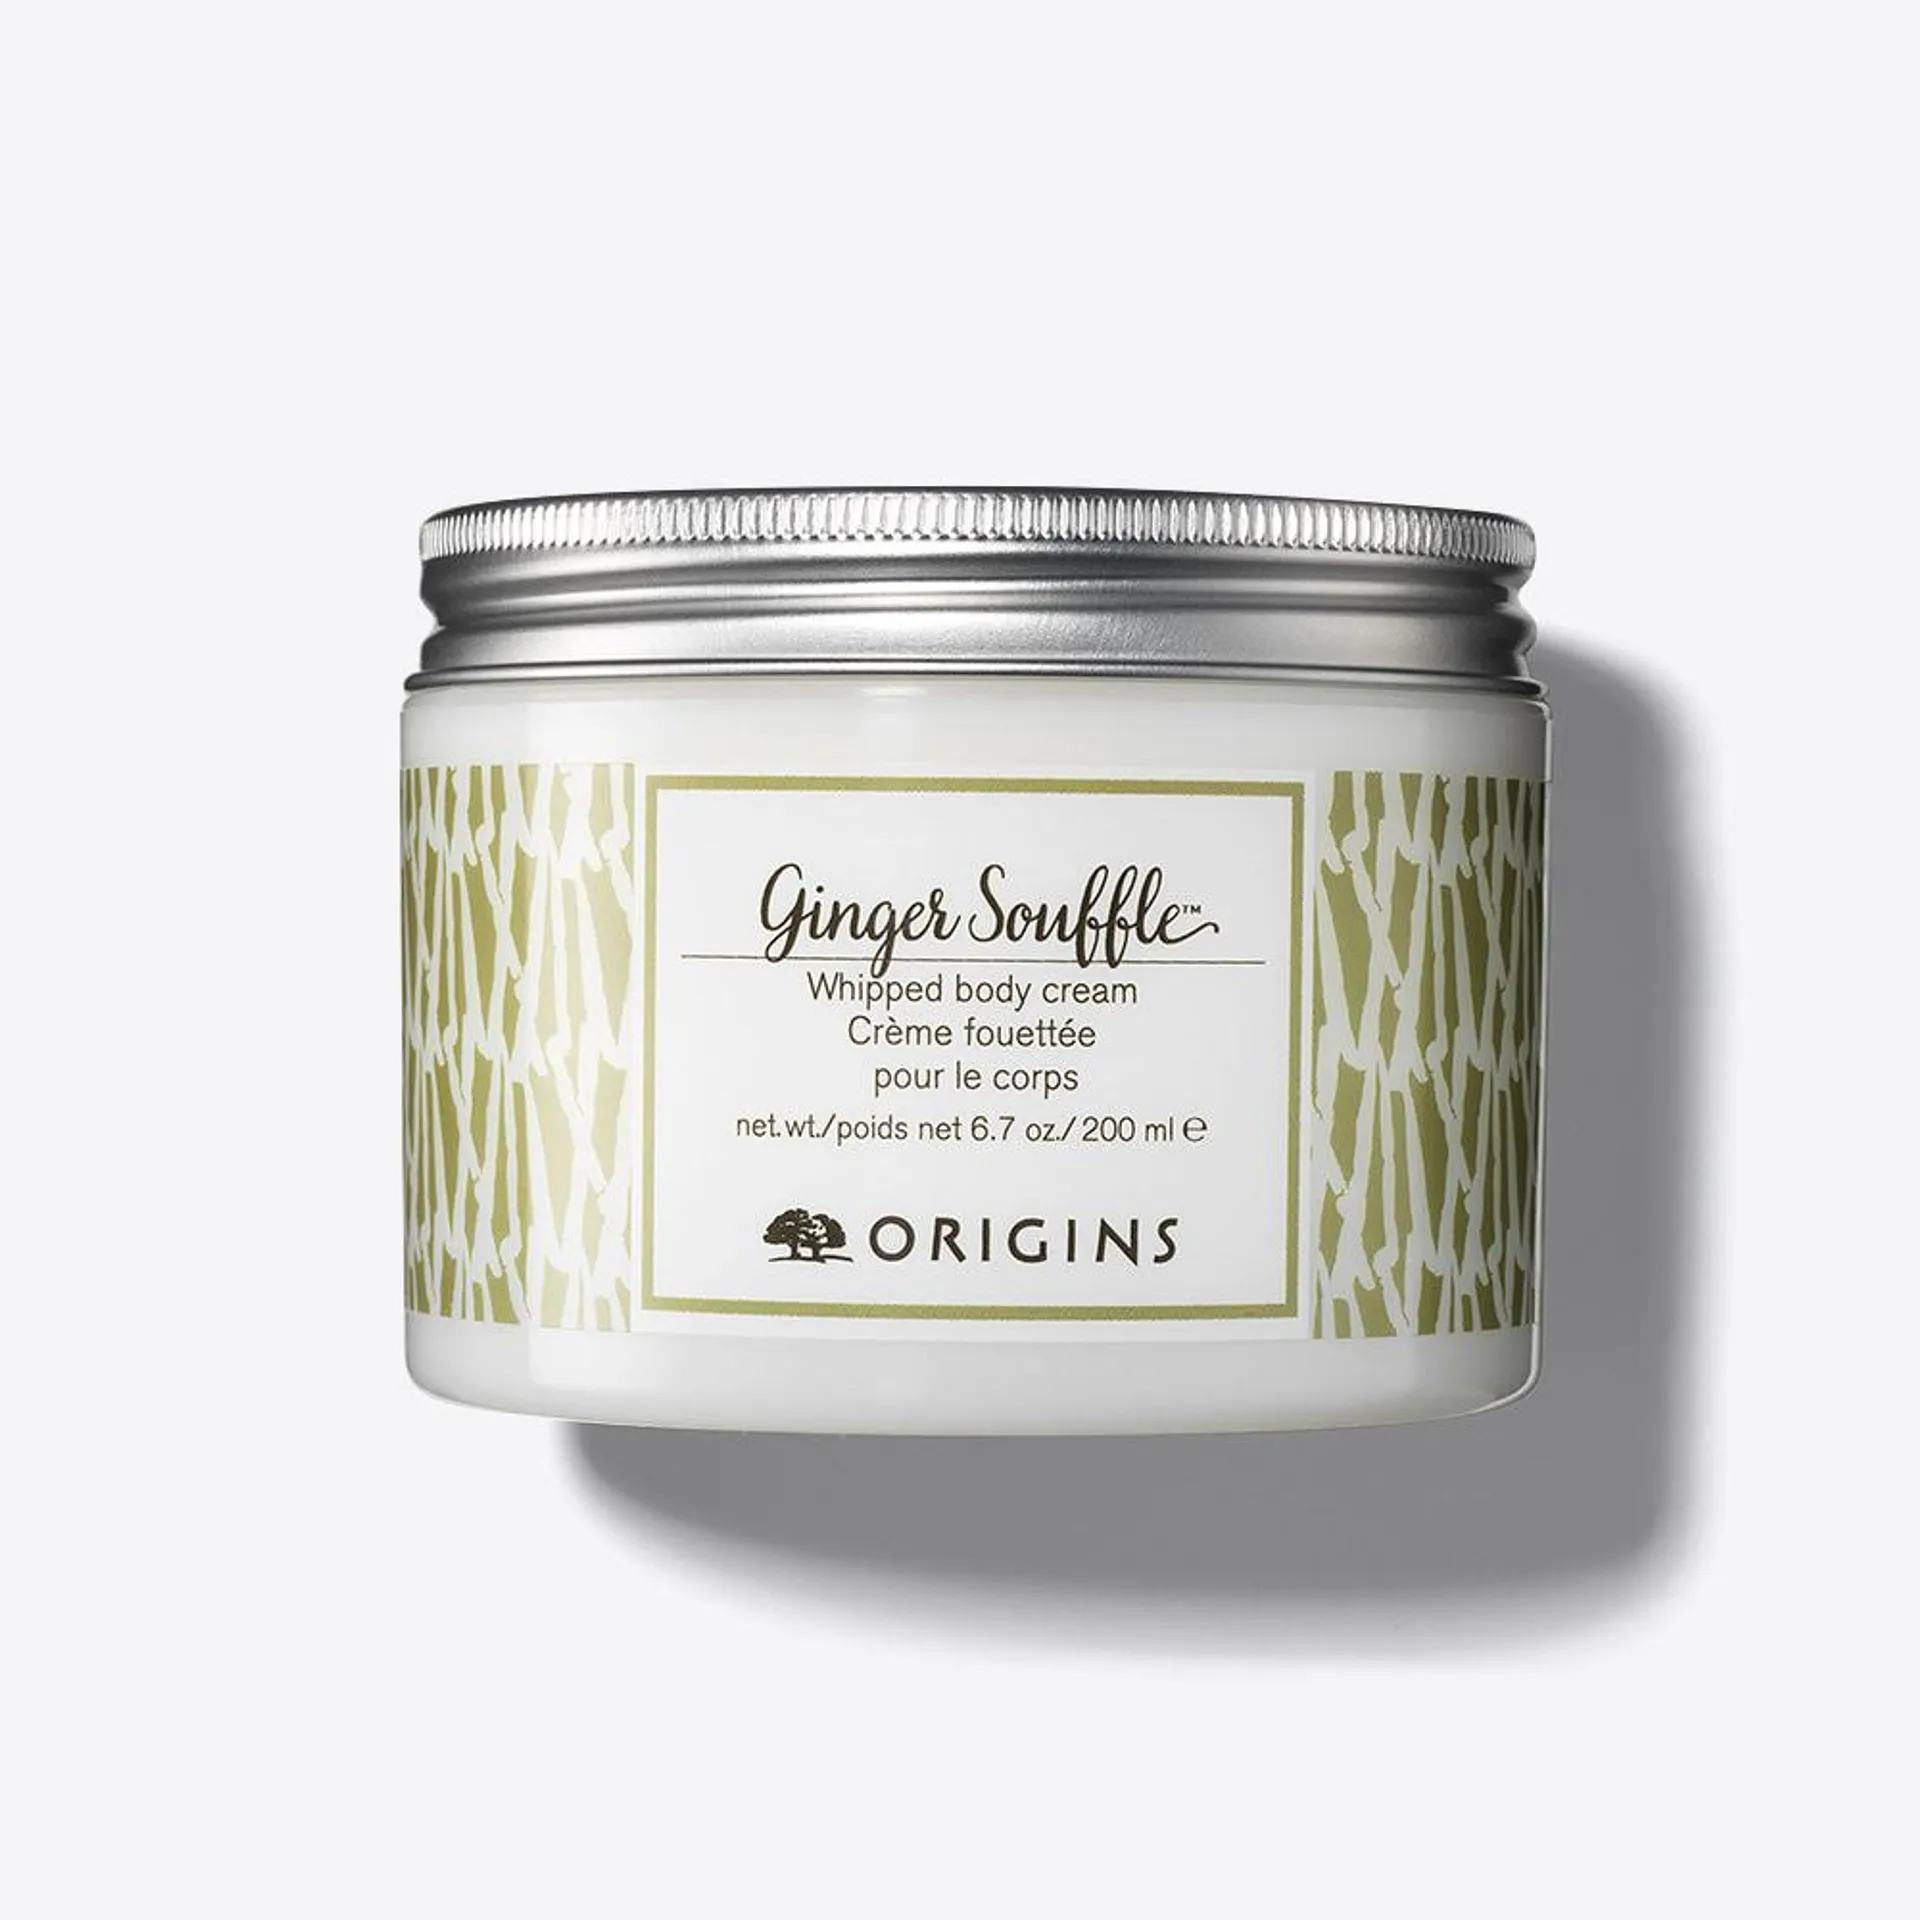 Ginger Souffle™ Whipped body cream